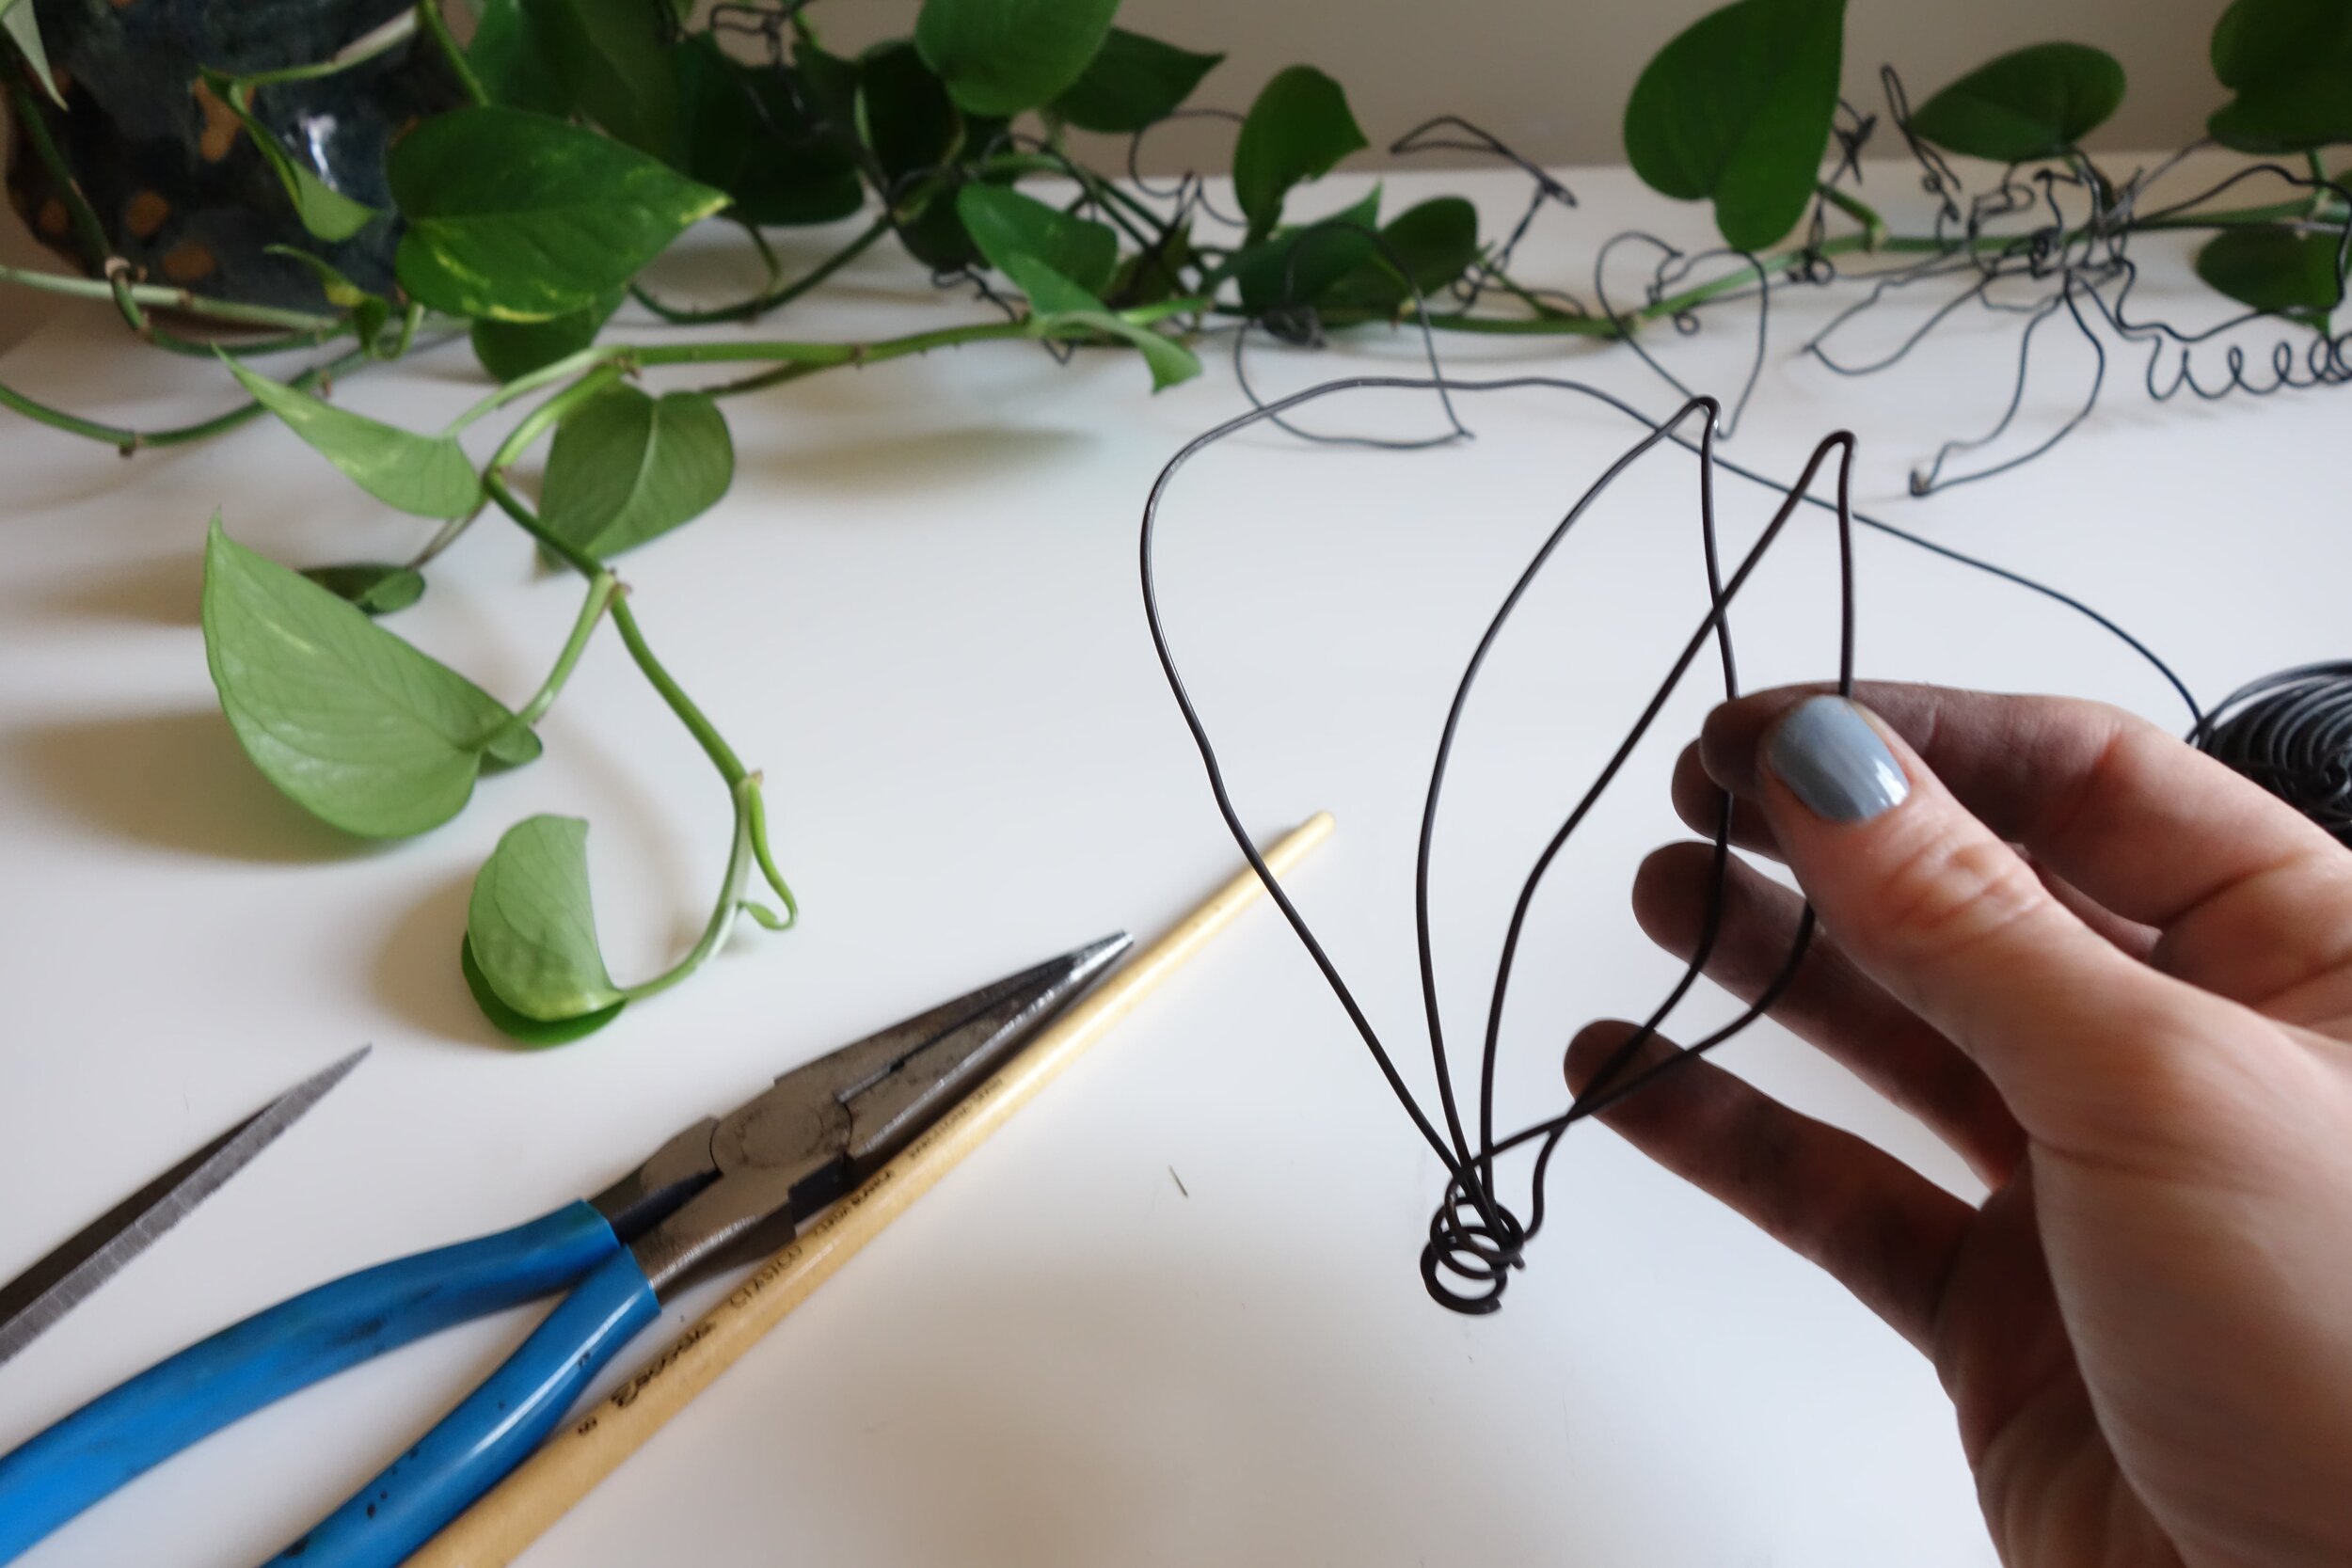 How to Make Wire Flowers (Step-by-Step Instructions)